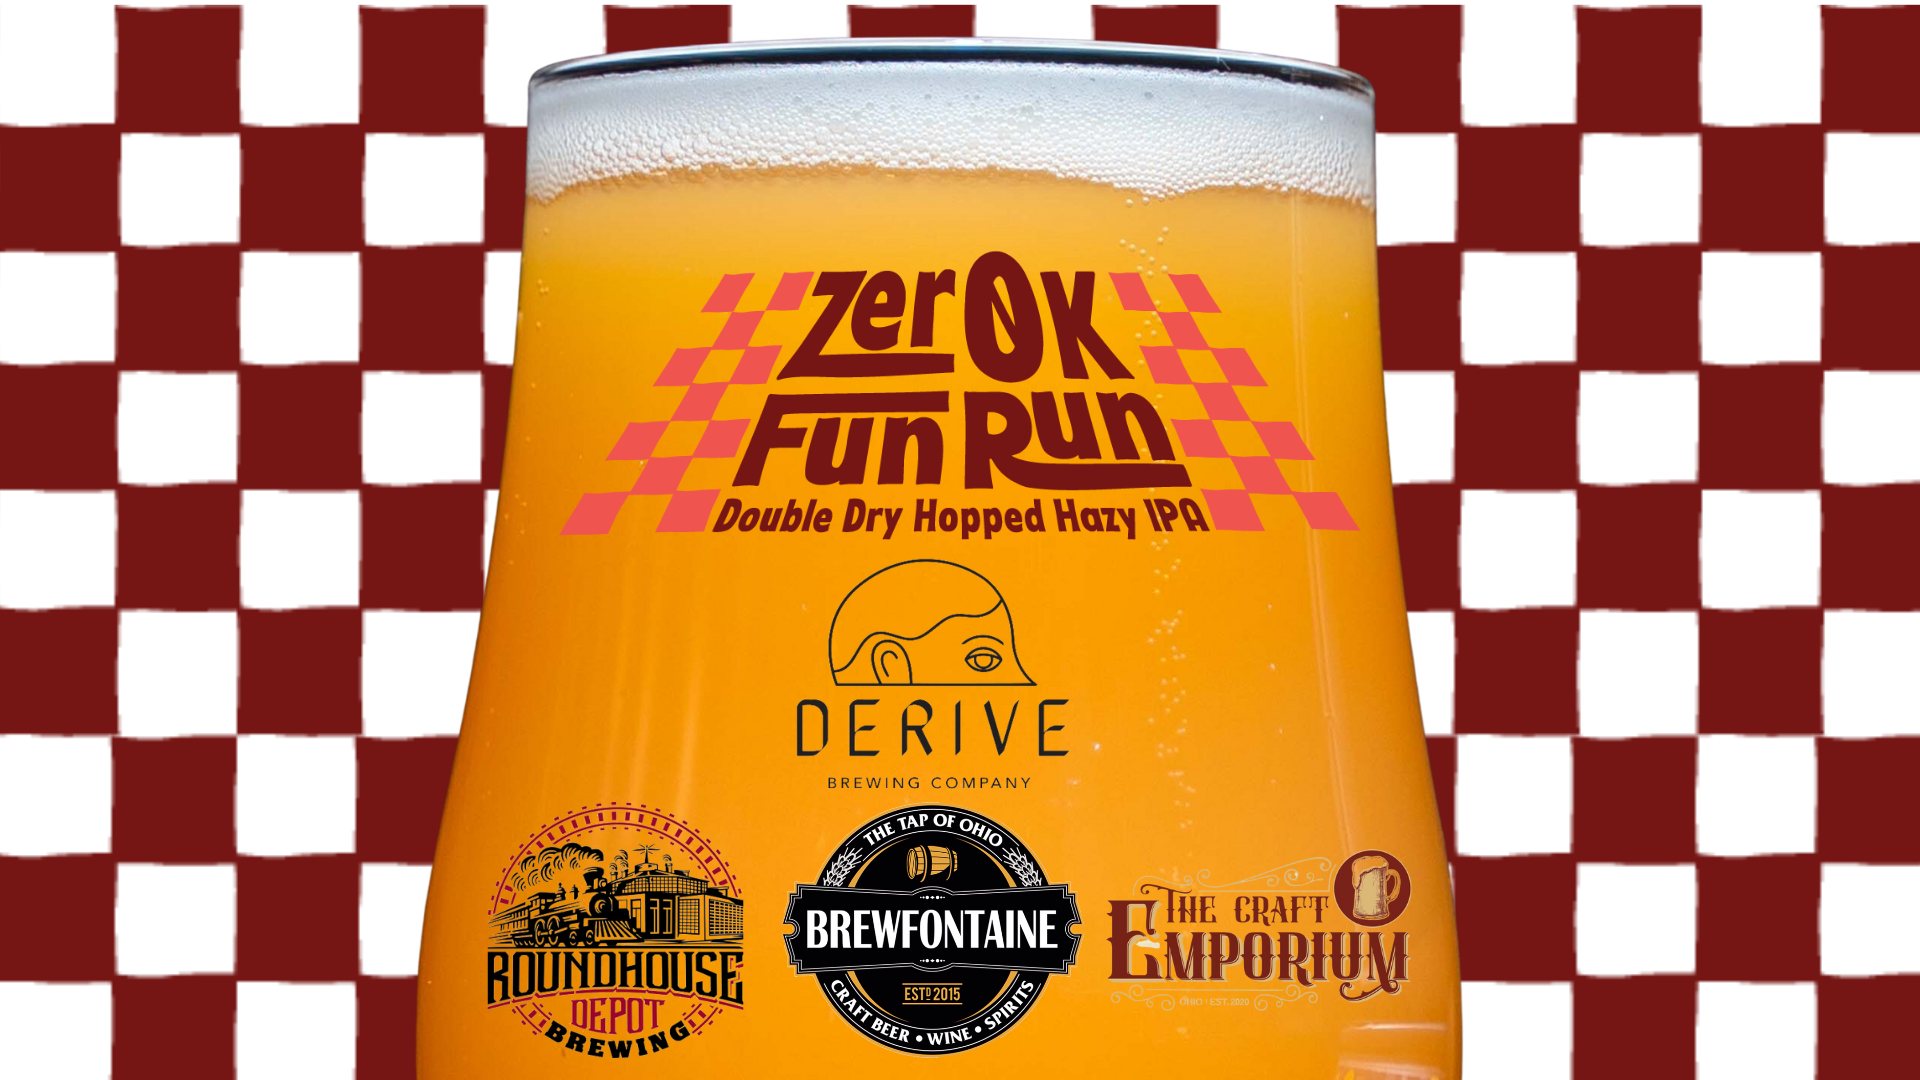 Zer0 K Fun Run Brought To You By Roundhouse Depot/The Craft Emporium/Brewfontaine